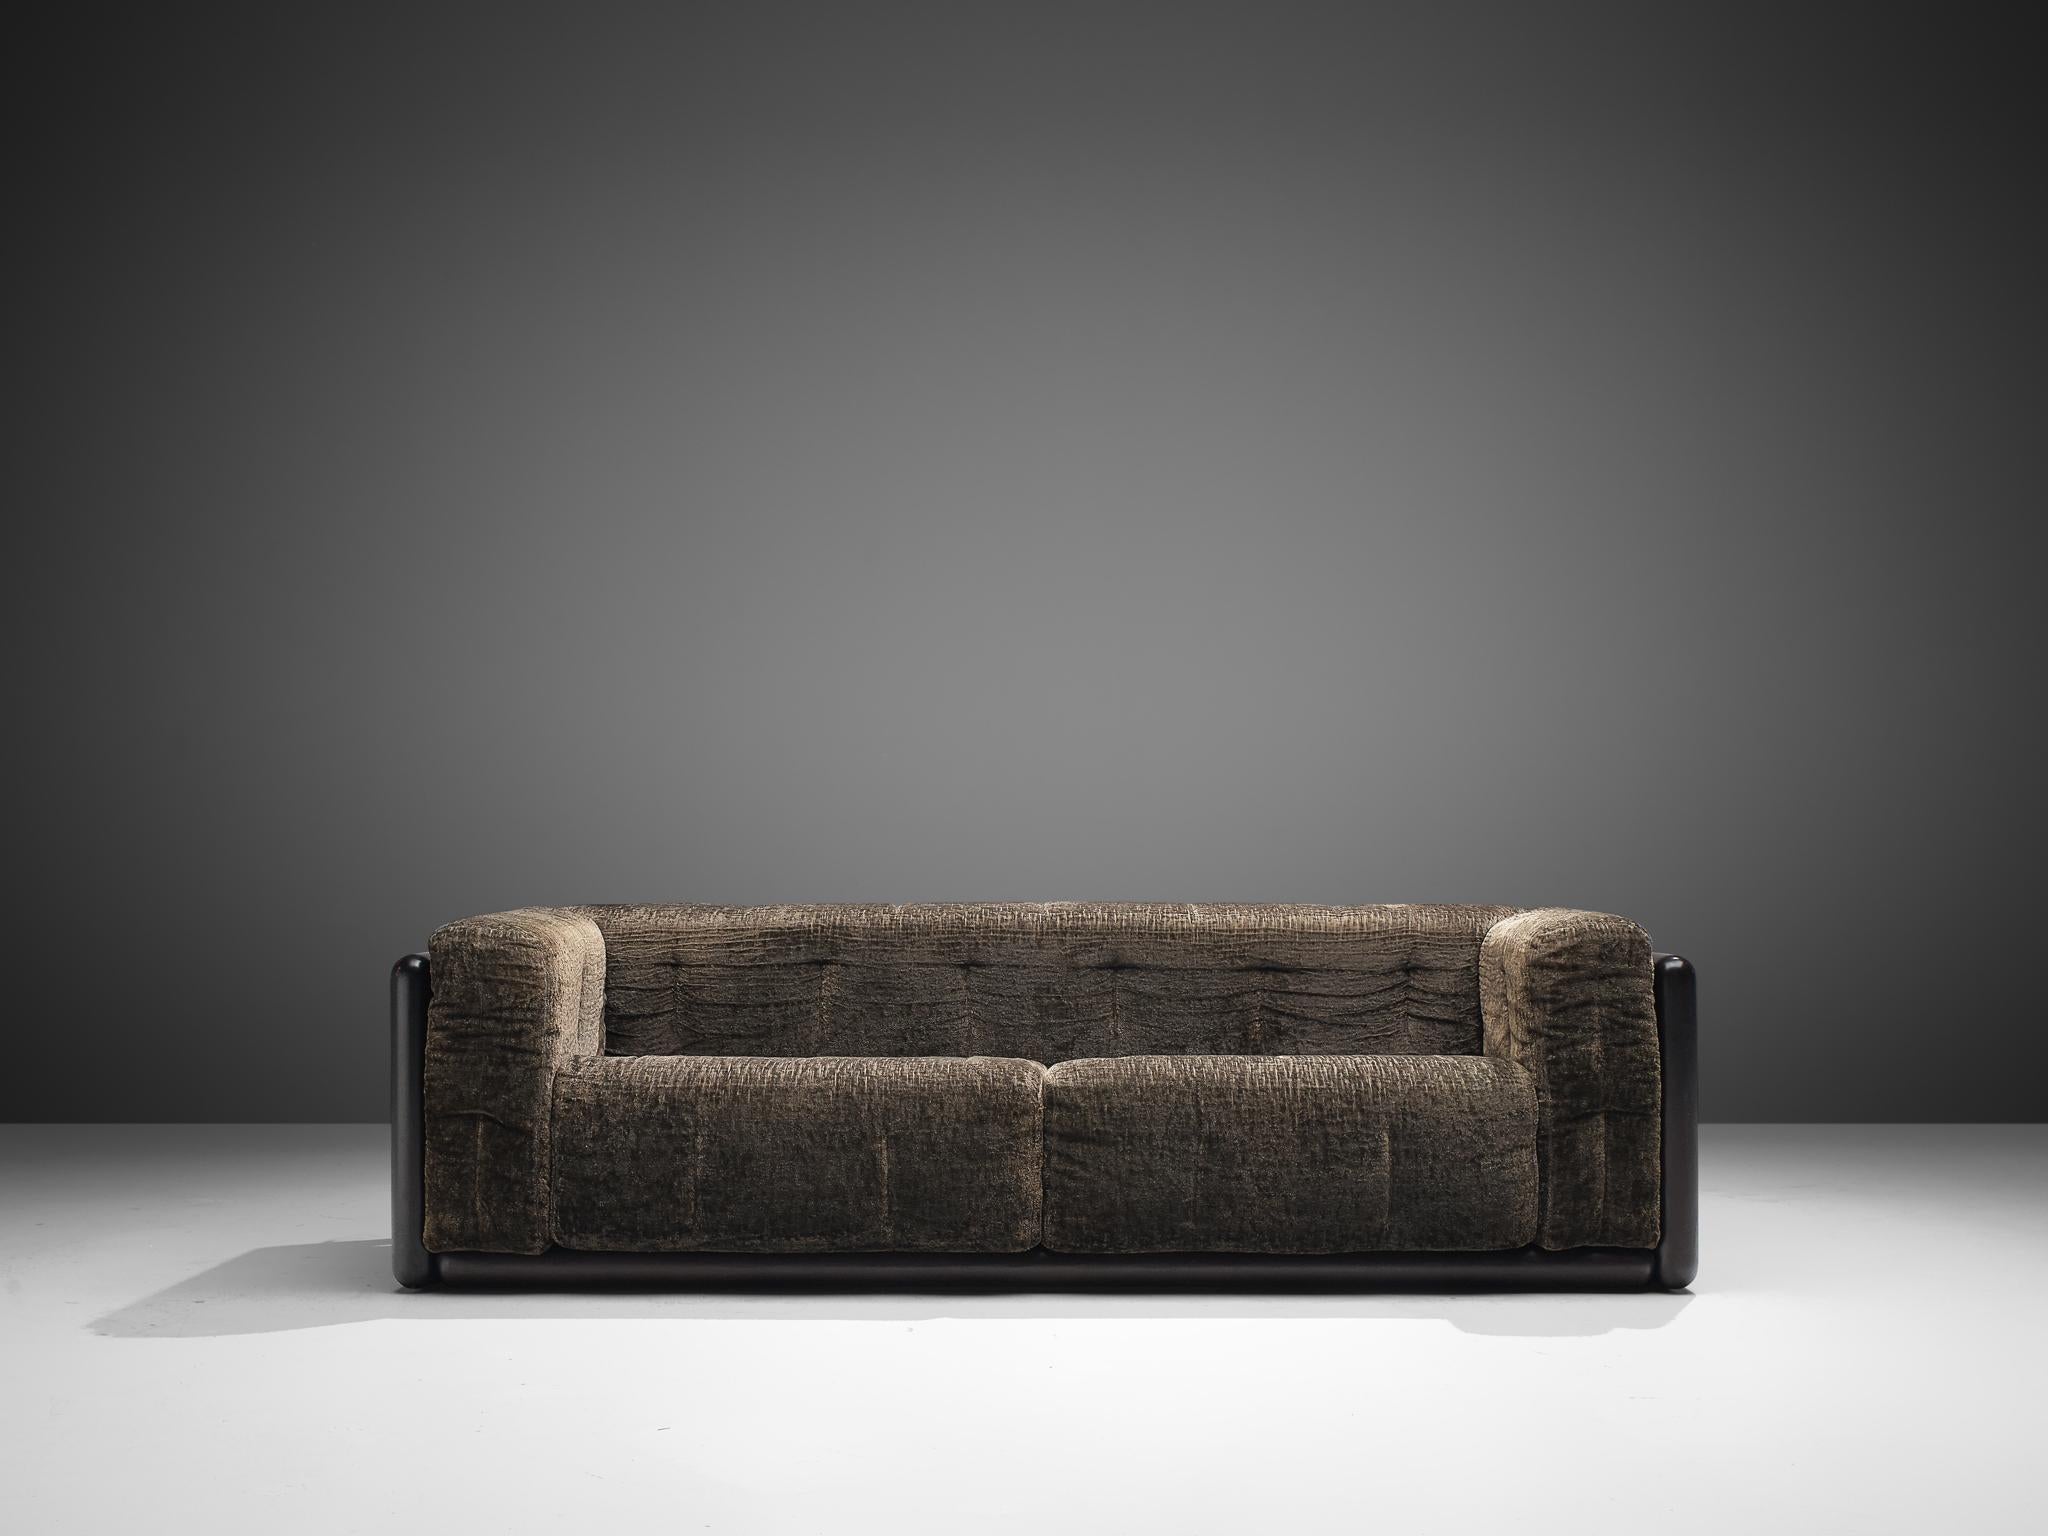 Carlo Scarpa for Simon, 'Cornaro' sofa, dark green velvet fabric, wood, Italy, 1973

The 'Cornaro' sofa by Carlo Scarpa is a perfect example of the Ultrarazionale style; breaking away from the strict limits of Rationalism, resulting in a sofa with a